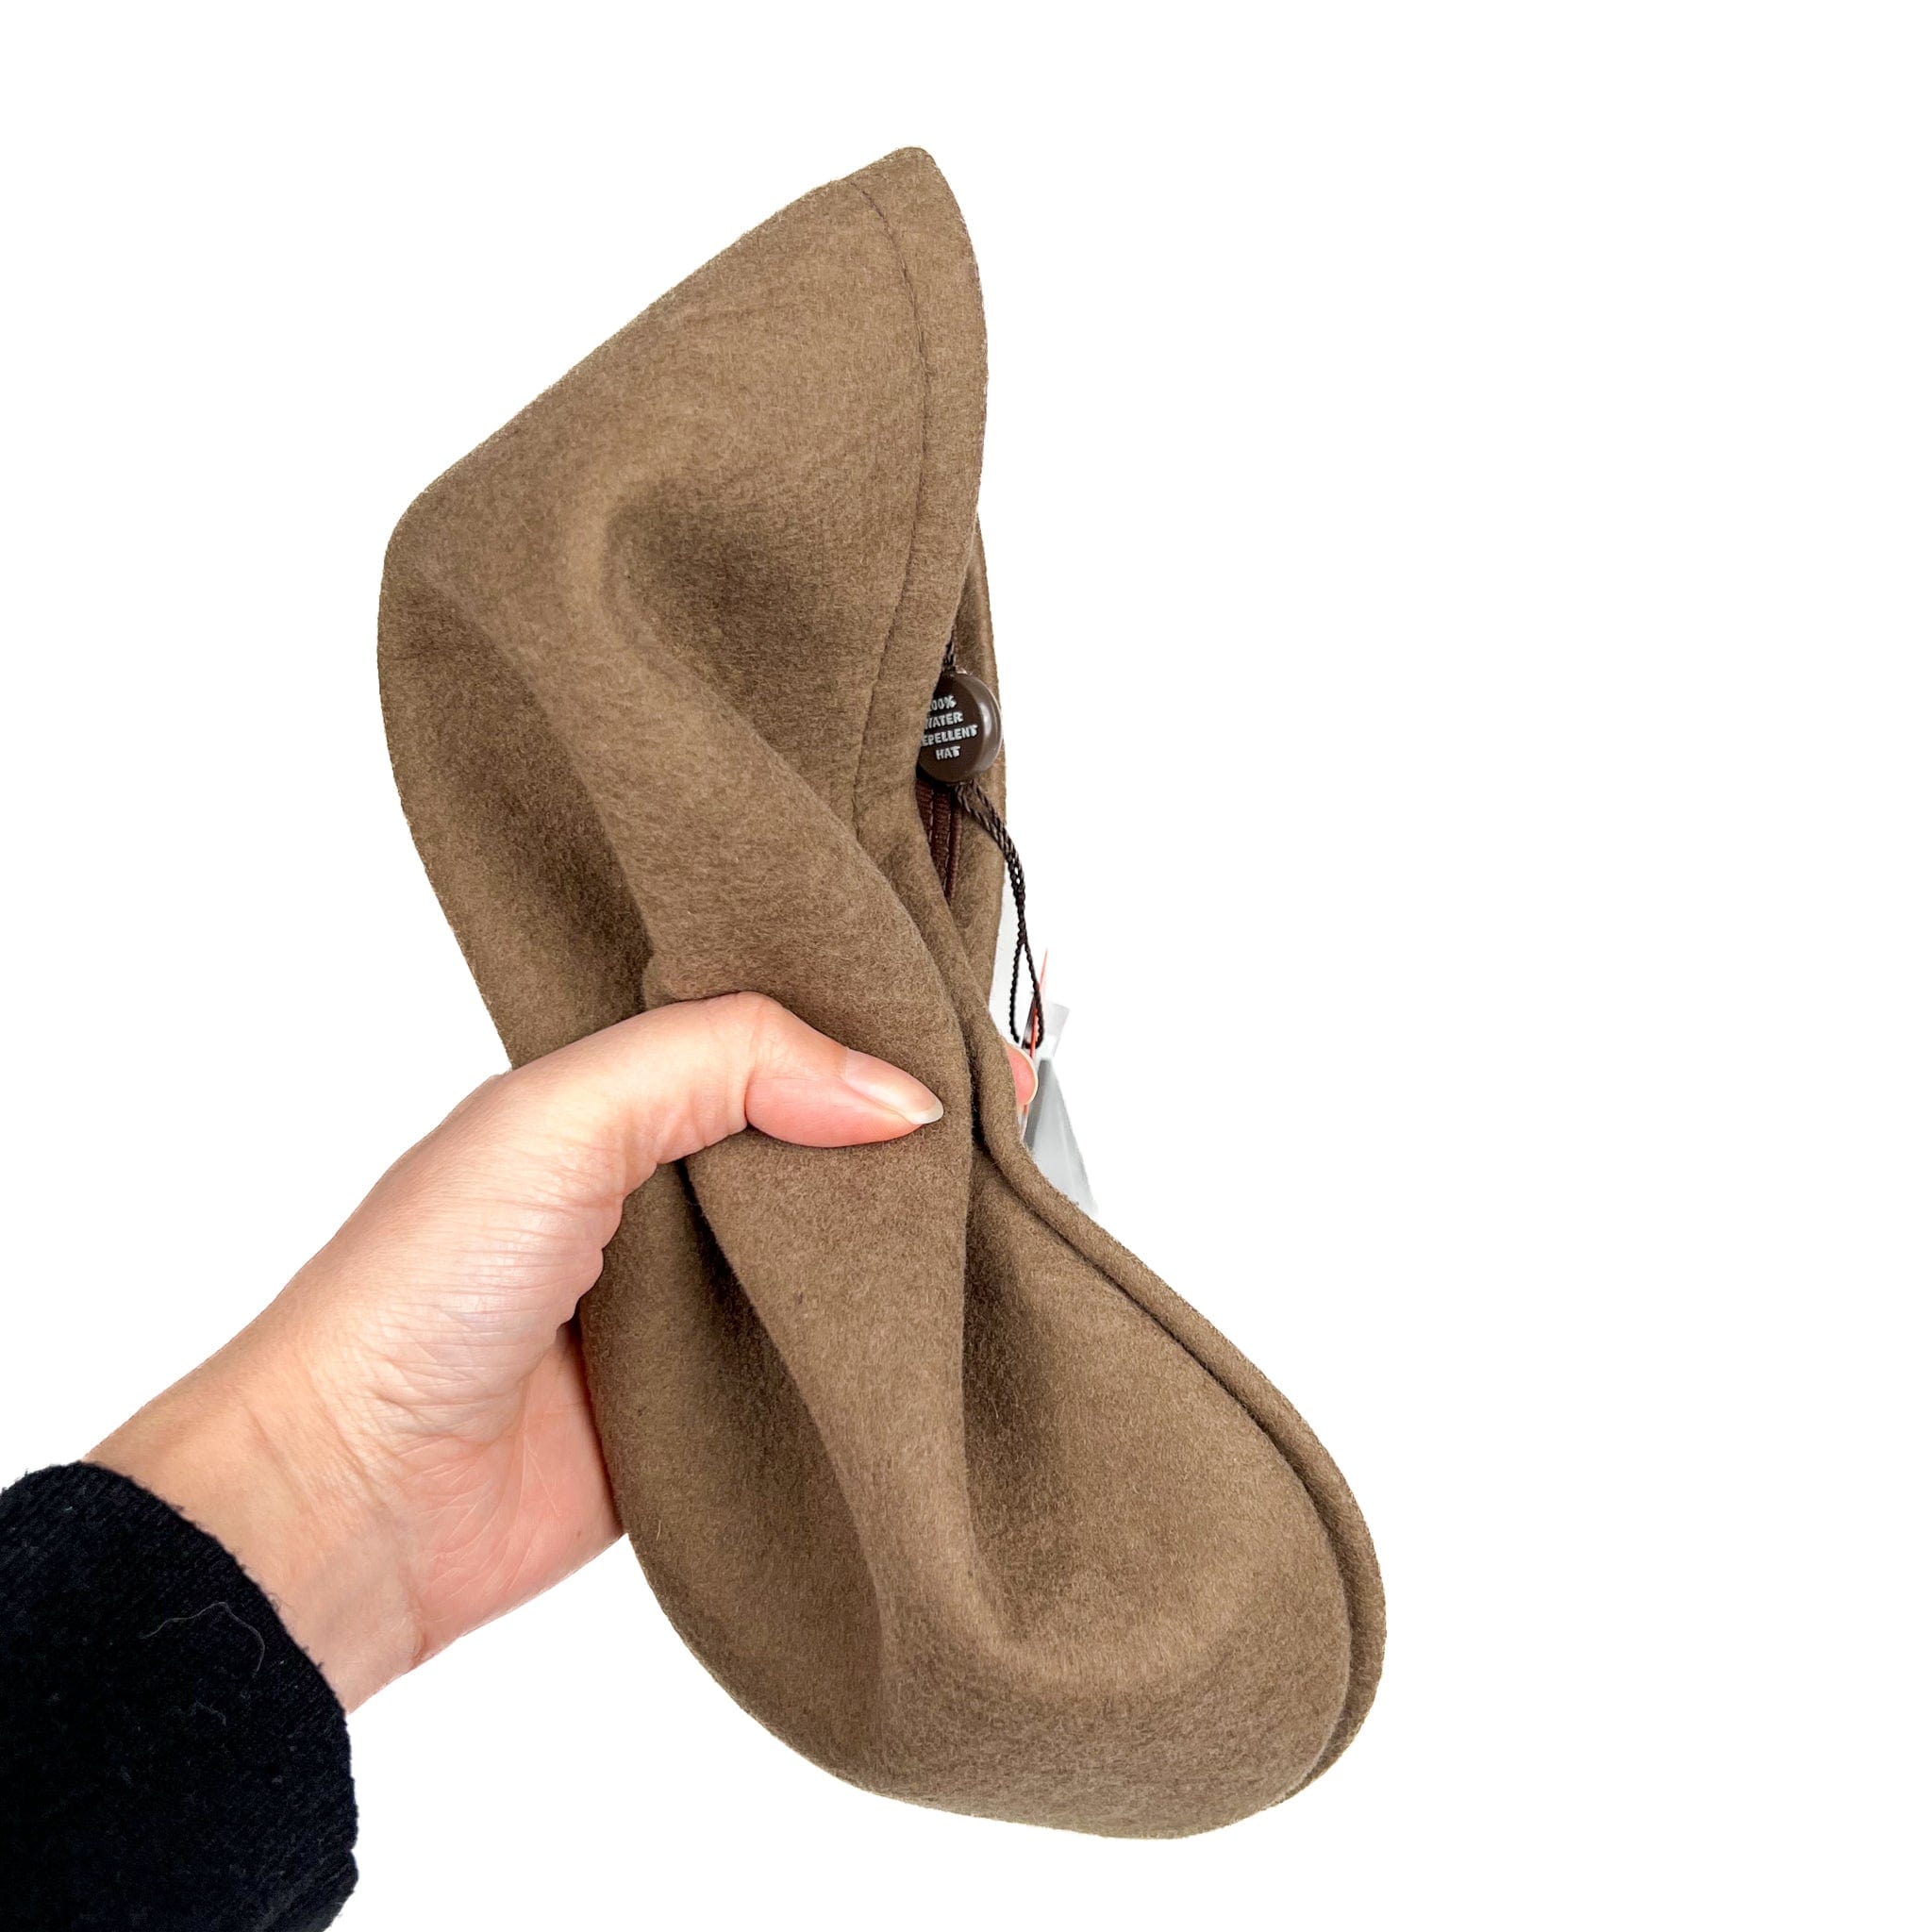 Virgin wool light felt fedora hat in tobacco with champagne gross grain ribbon and bow, with iconic  crafted society scissor on the left side. 100% virgin wool, water repellent and crushable. Crushed hat example